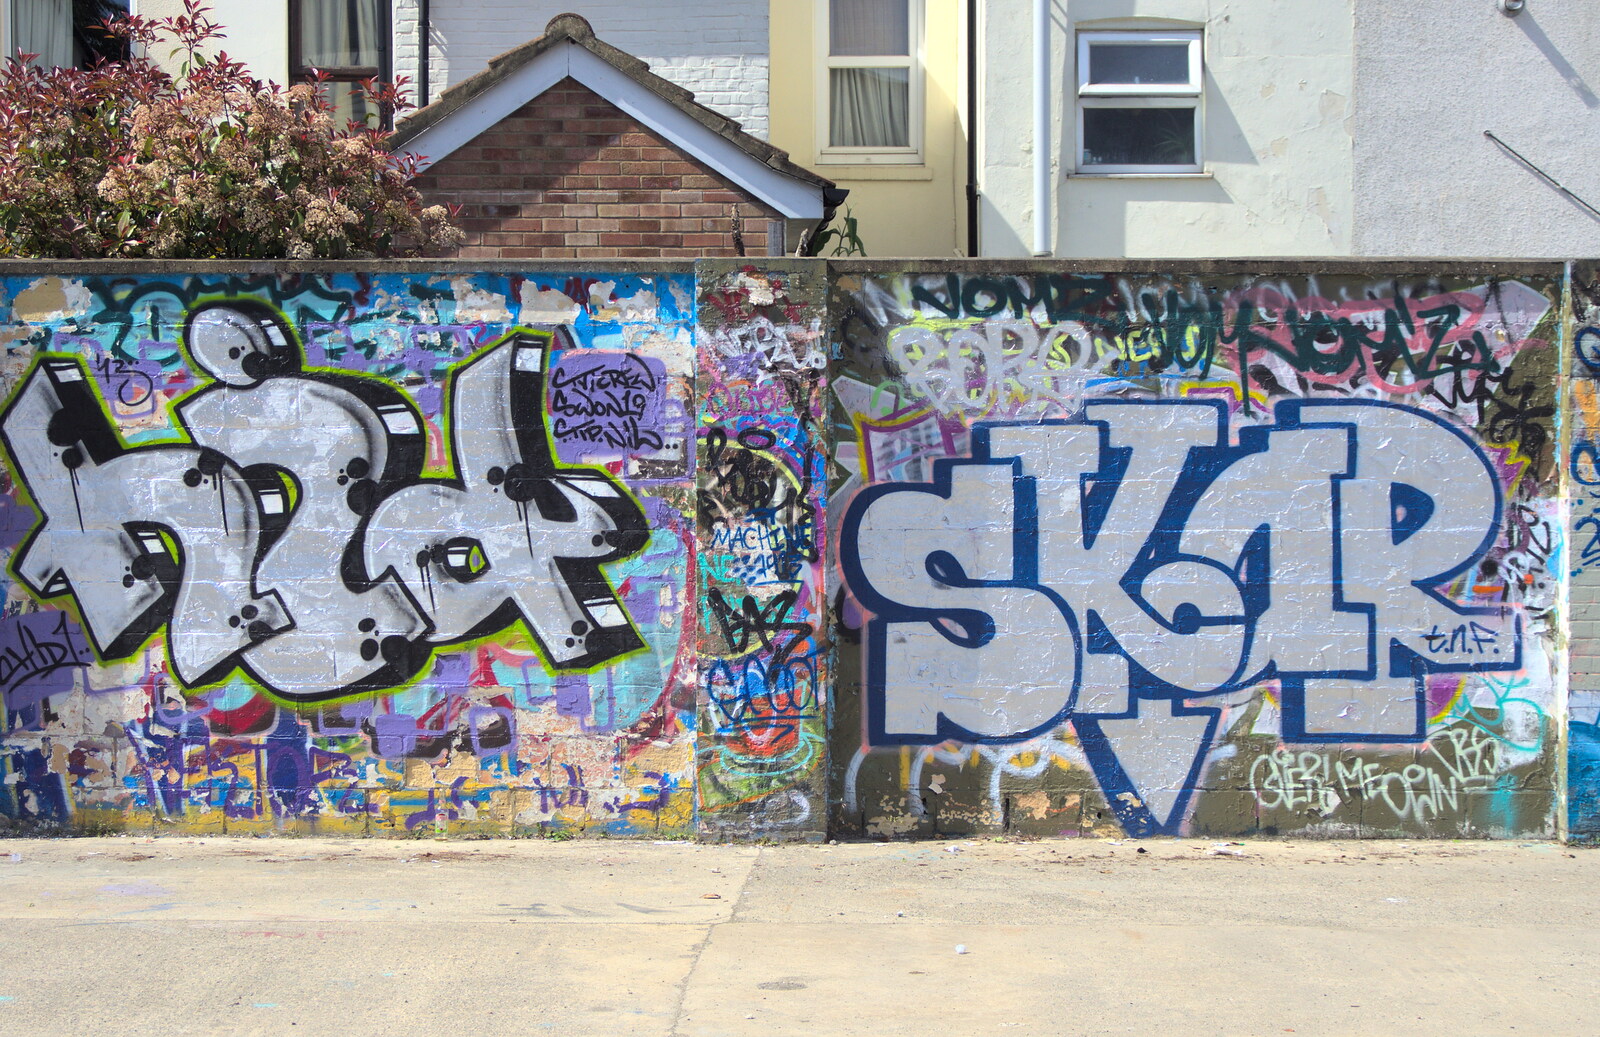 A covered wall from The Dereliction of HMSO, Botolph Street, Norwich - 26th May 2013